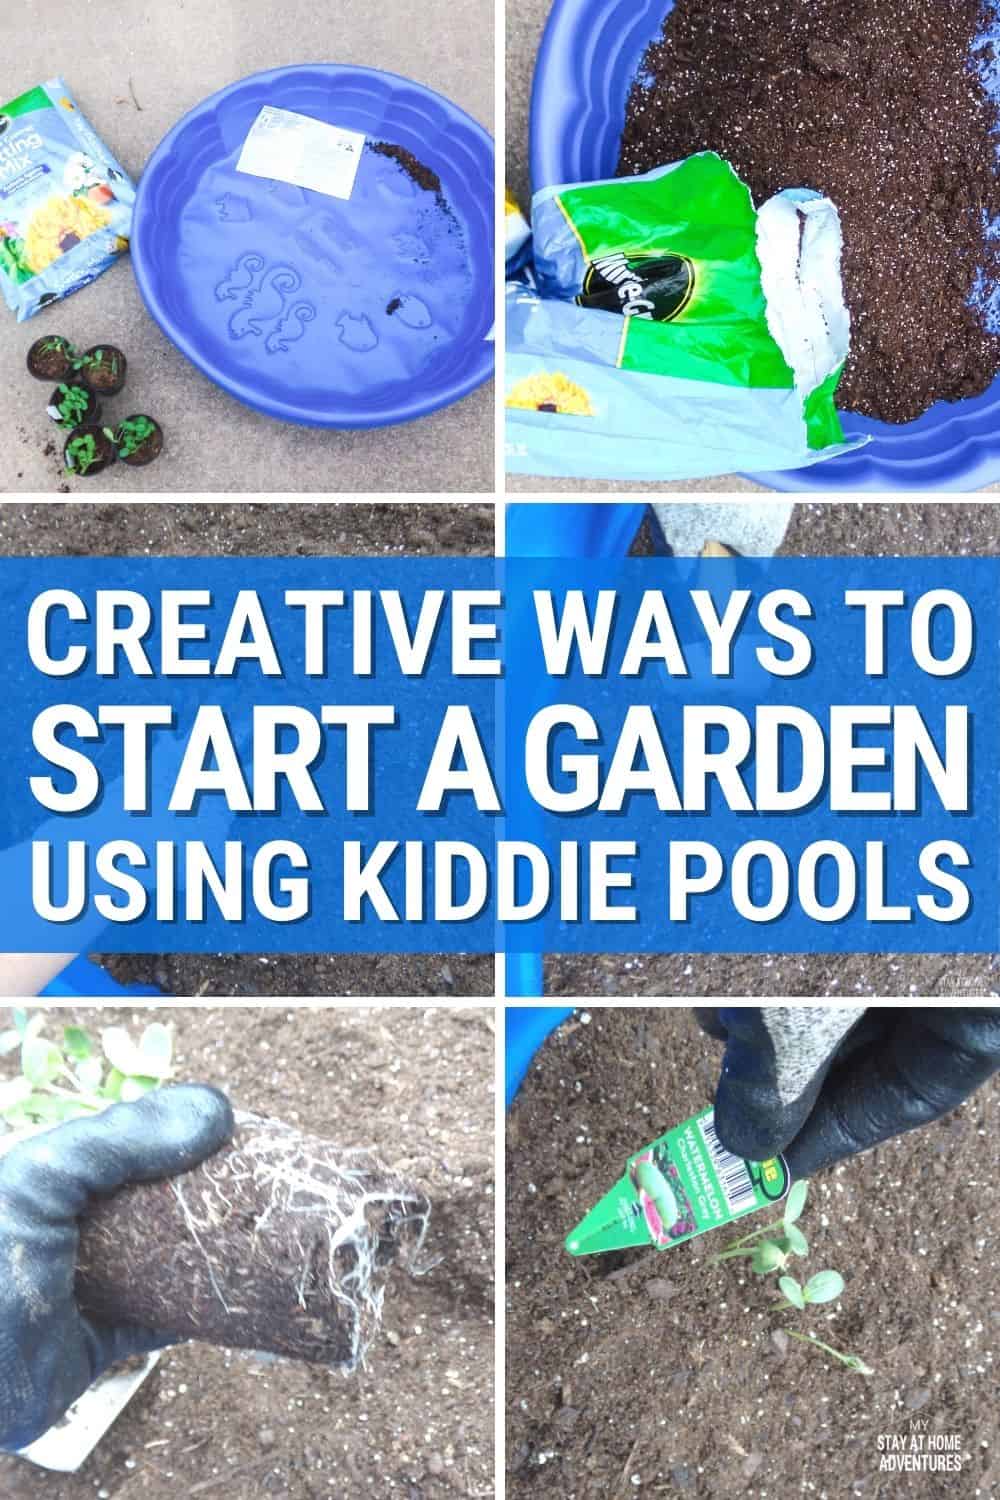 Are you looking for an incredibly inexpensive way to garden? You can build your own kiddie pool garden for as little as $10! via @mystayathome